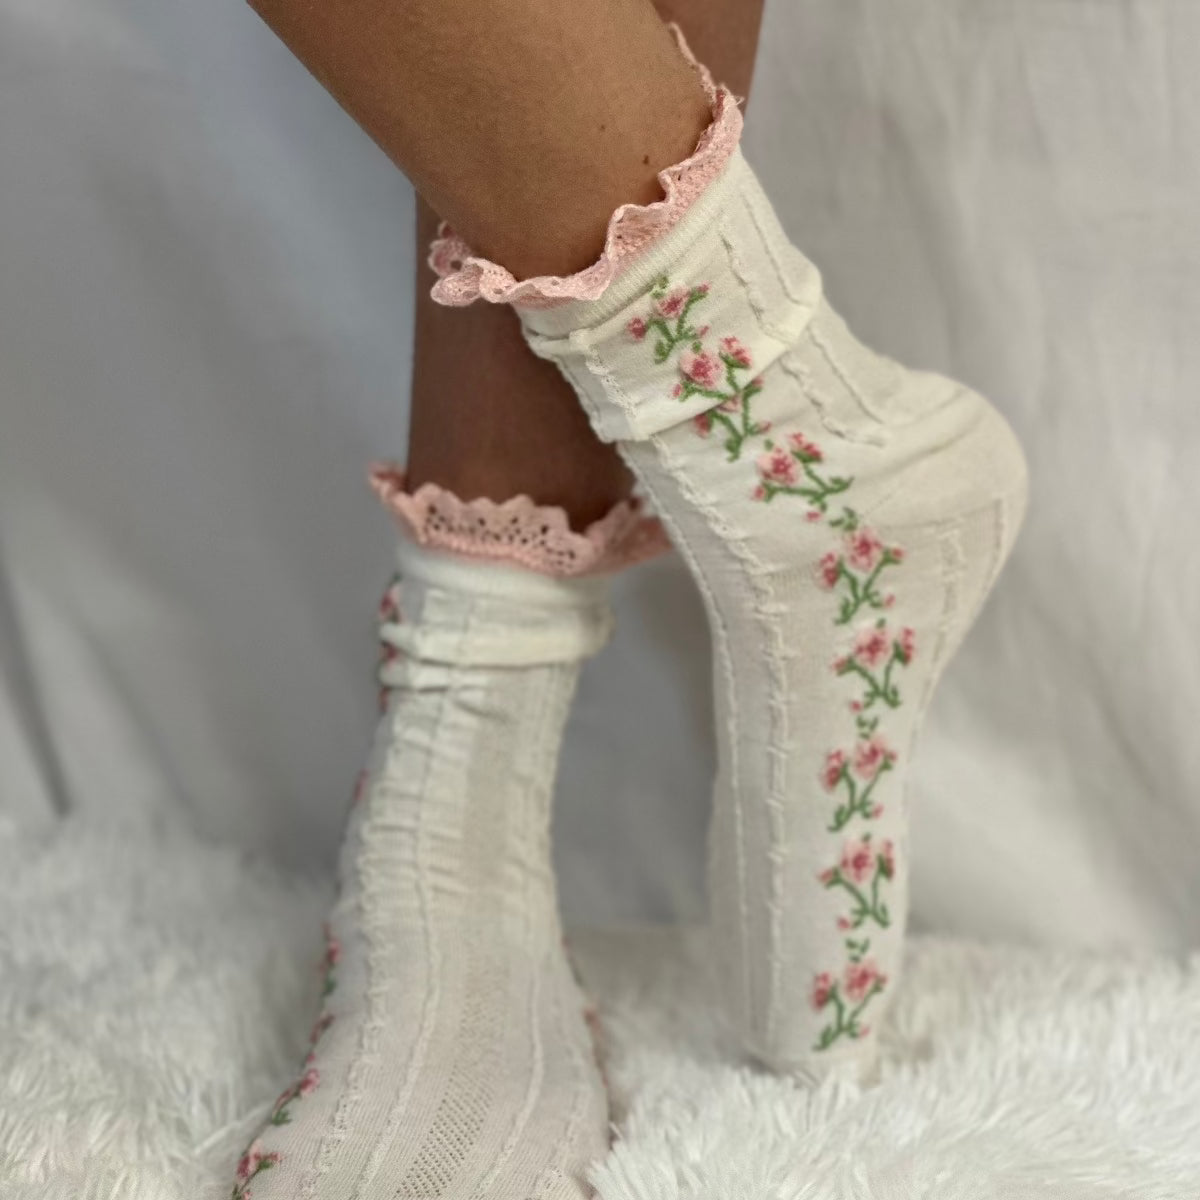 GARDEN PARTY floral lace ankle sock - pink | feminine lace socks for ...